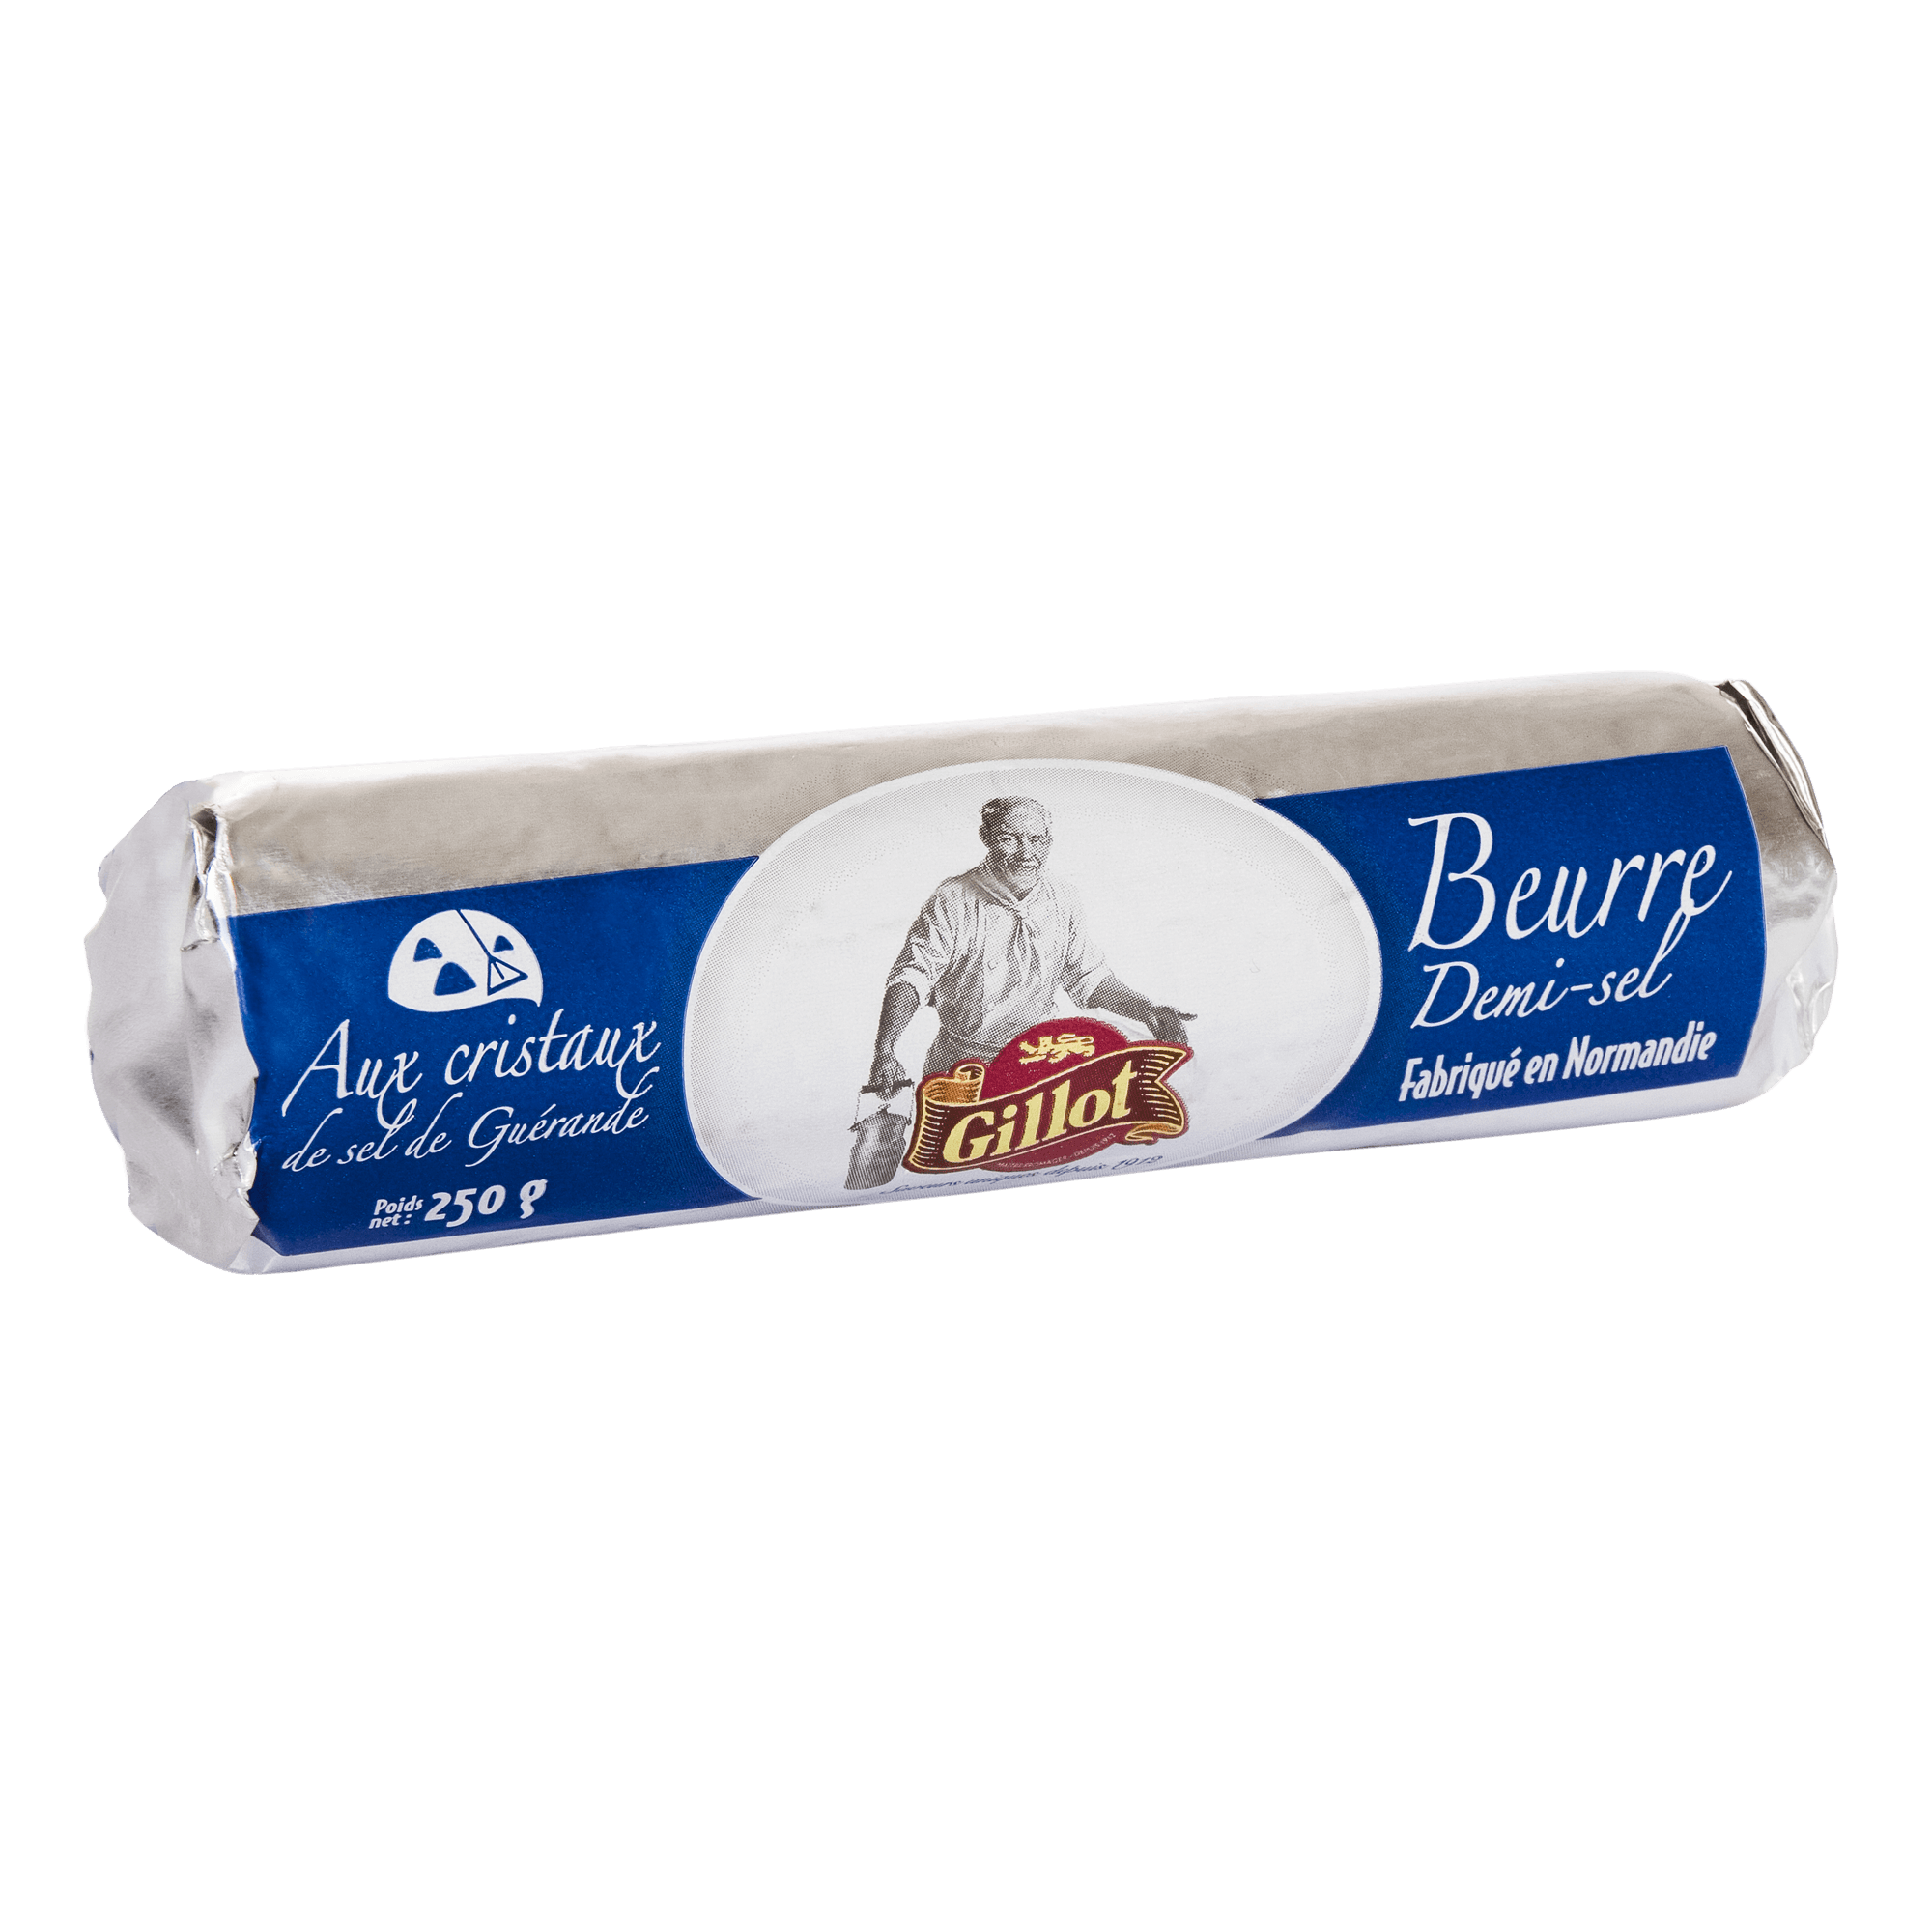 beurre demi sel - Fromagerie Gillot